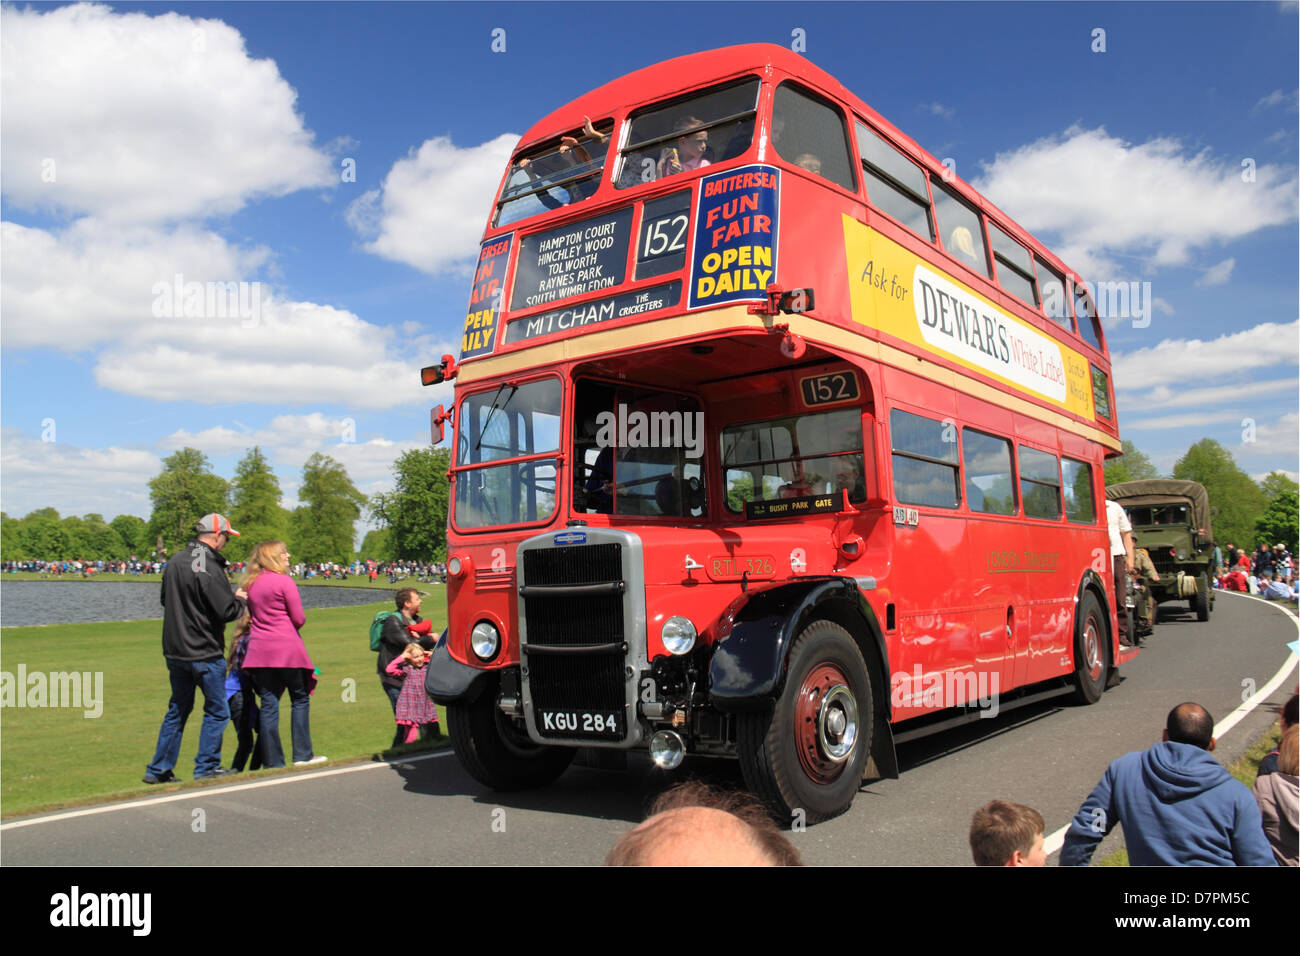 Leyland RTL (1949) London Transport bus. Chestnut Sunday. Bushy Park, Hampton Court, London, UK. Sunday 12th May 2013. Vintage and classic vehicle parade and display with fairground attractions and military re-enactments. Credit: Ian Bottle/ Alamy Live News Stock Photo